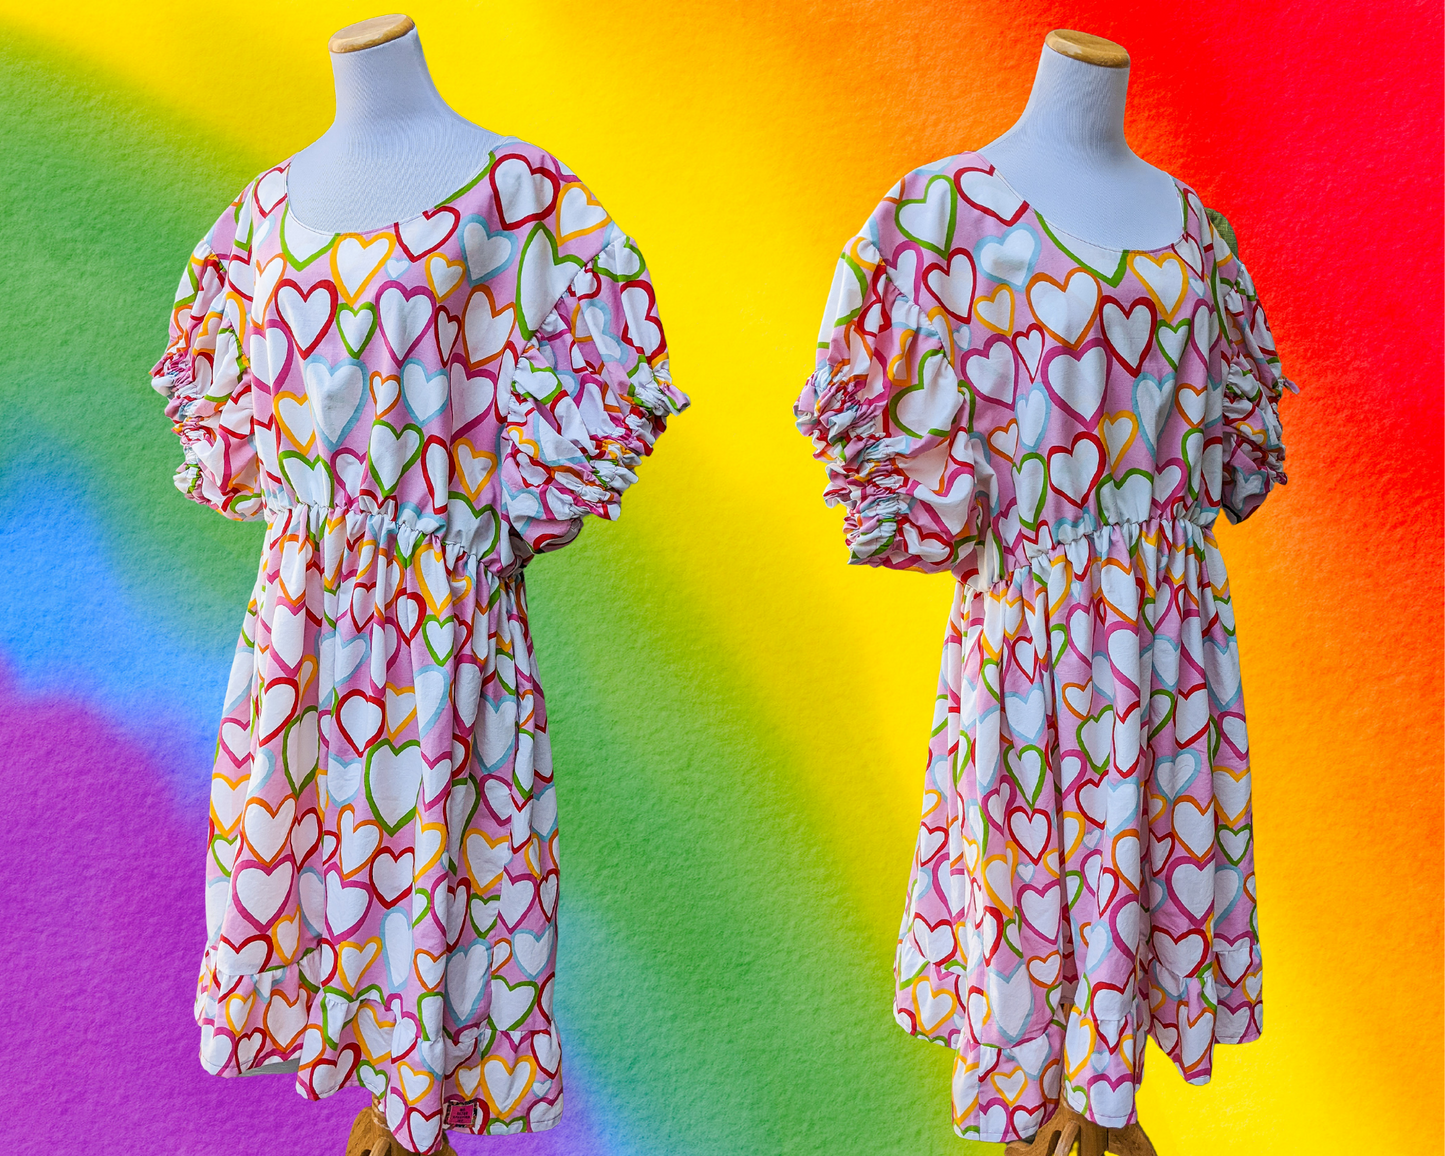 Draps faits à la main, Upcycled Rainbow Hearts Patterned, Short Puffy Sleeves, Pride LGBTQ+ Fashion, Taille 2XL